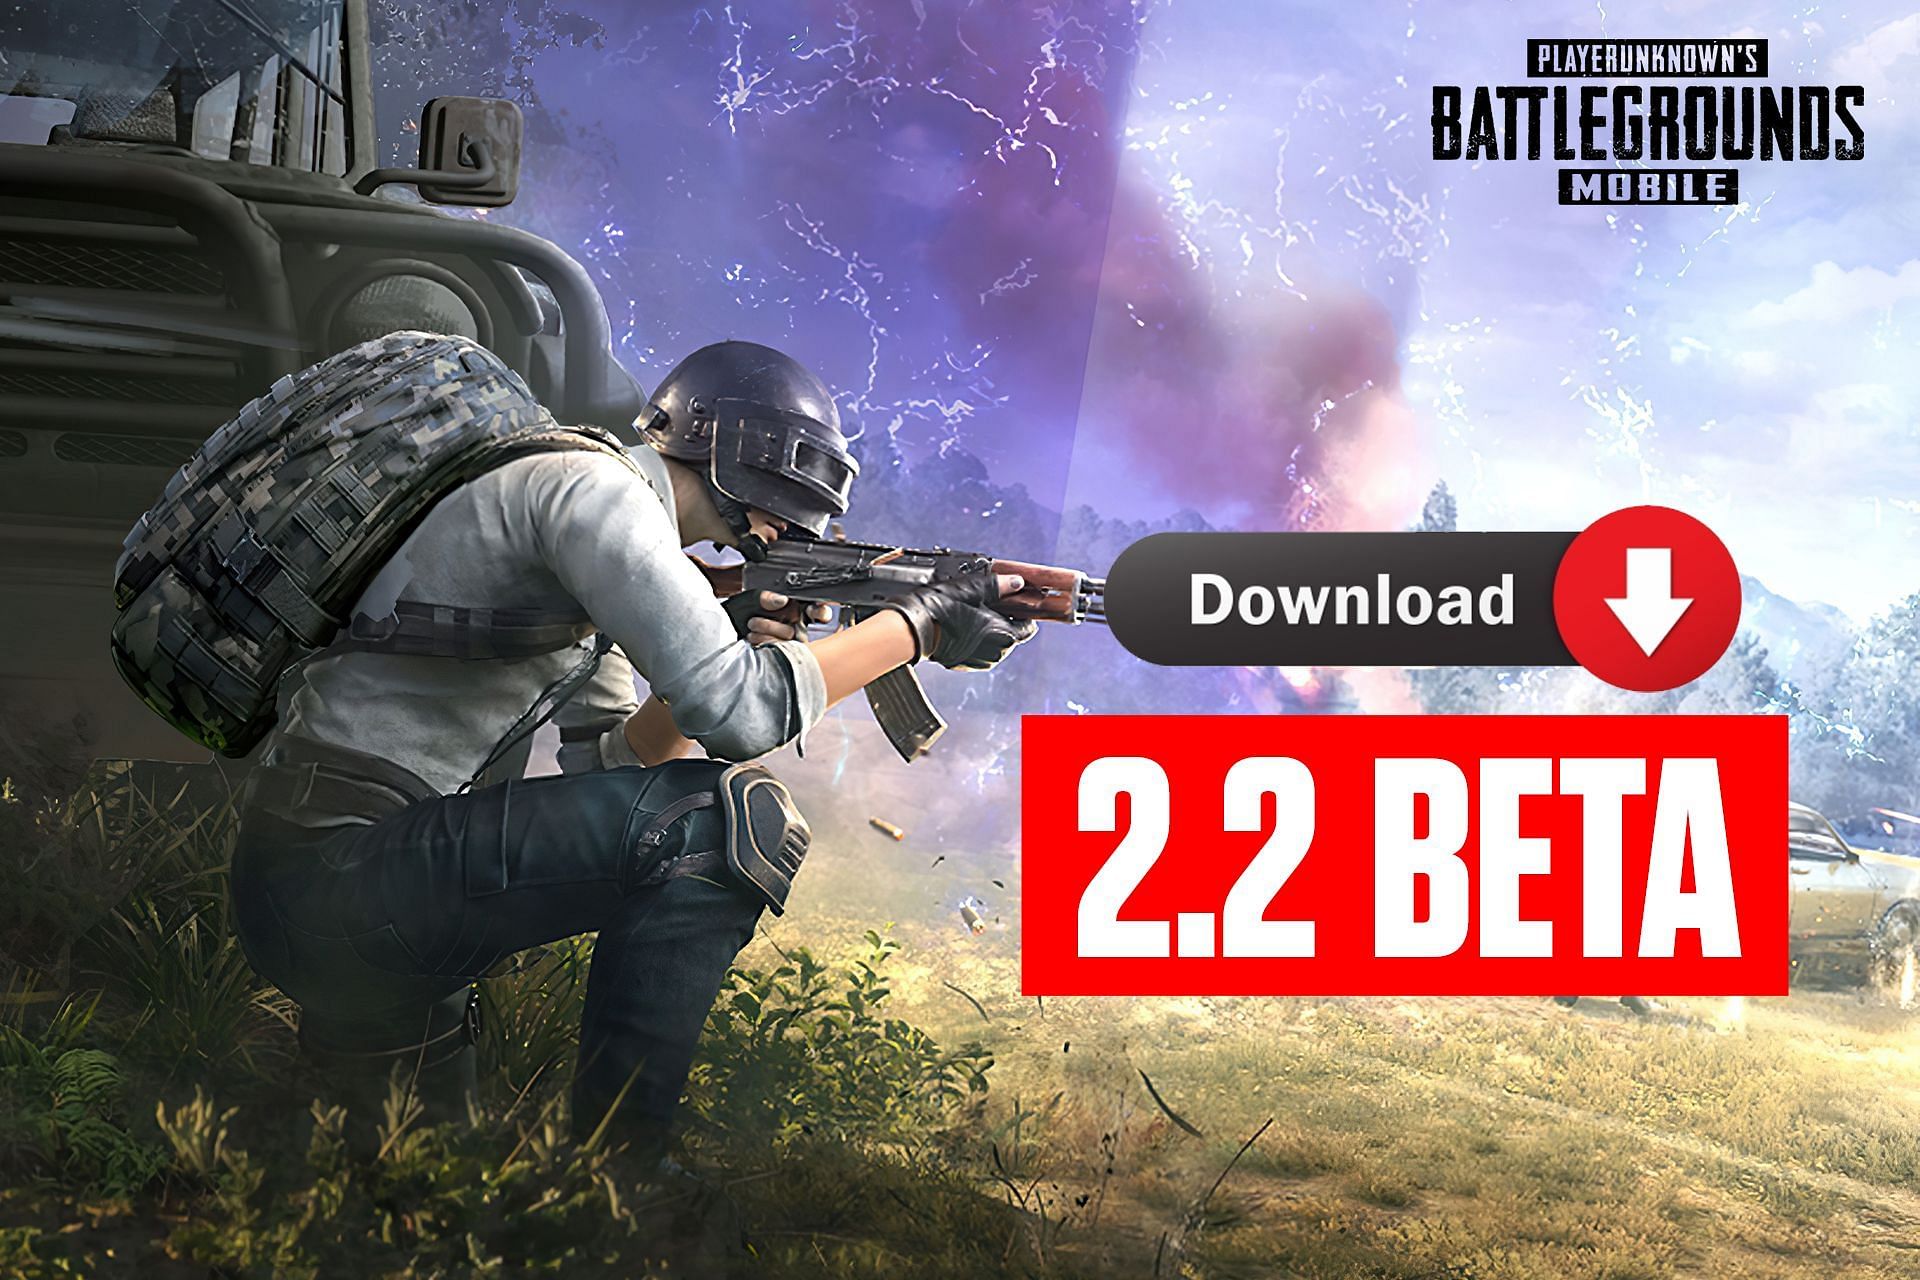 Some users have doubts about downloading the 2.2 beta (Image via Sportskeeda)